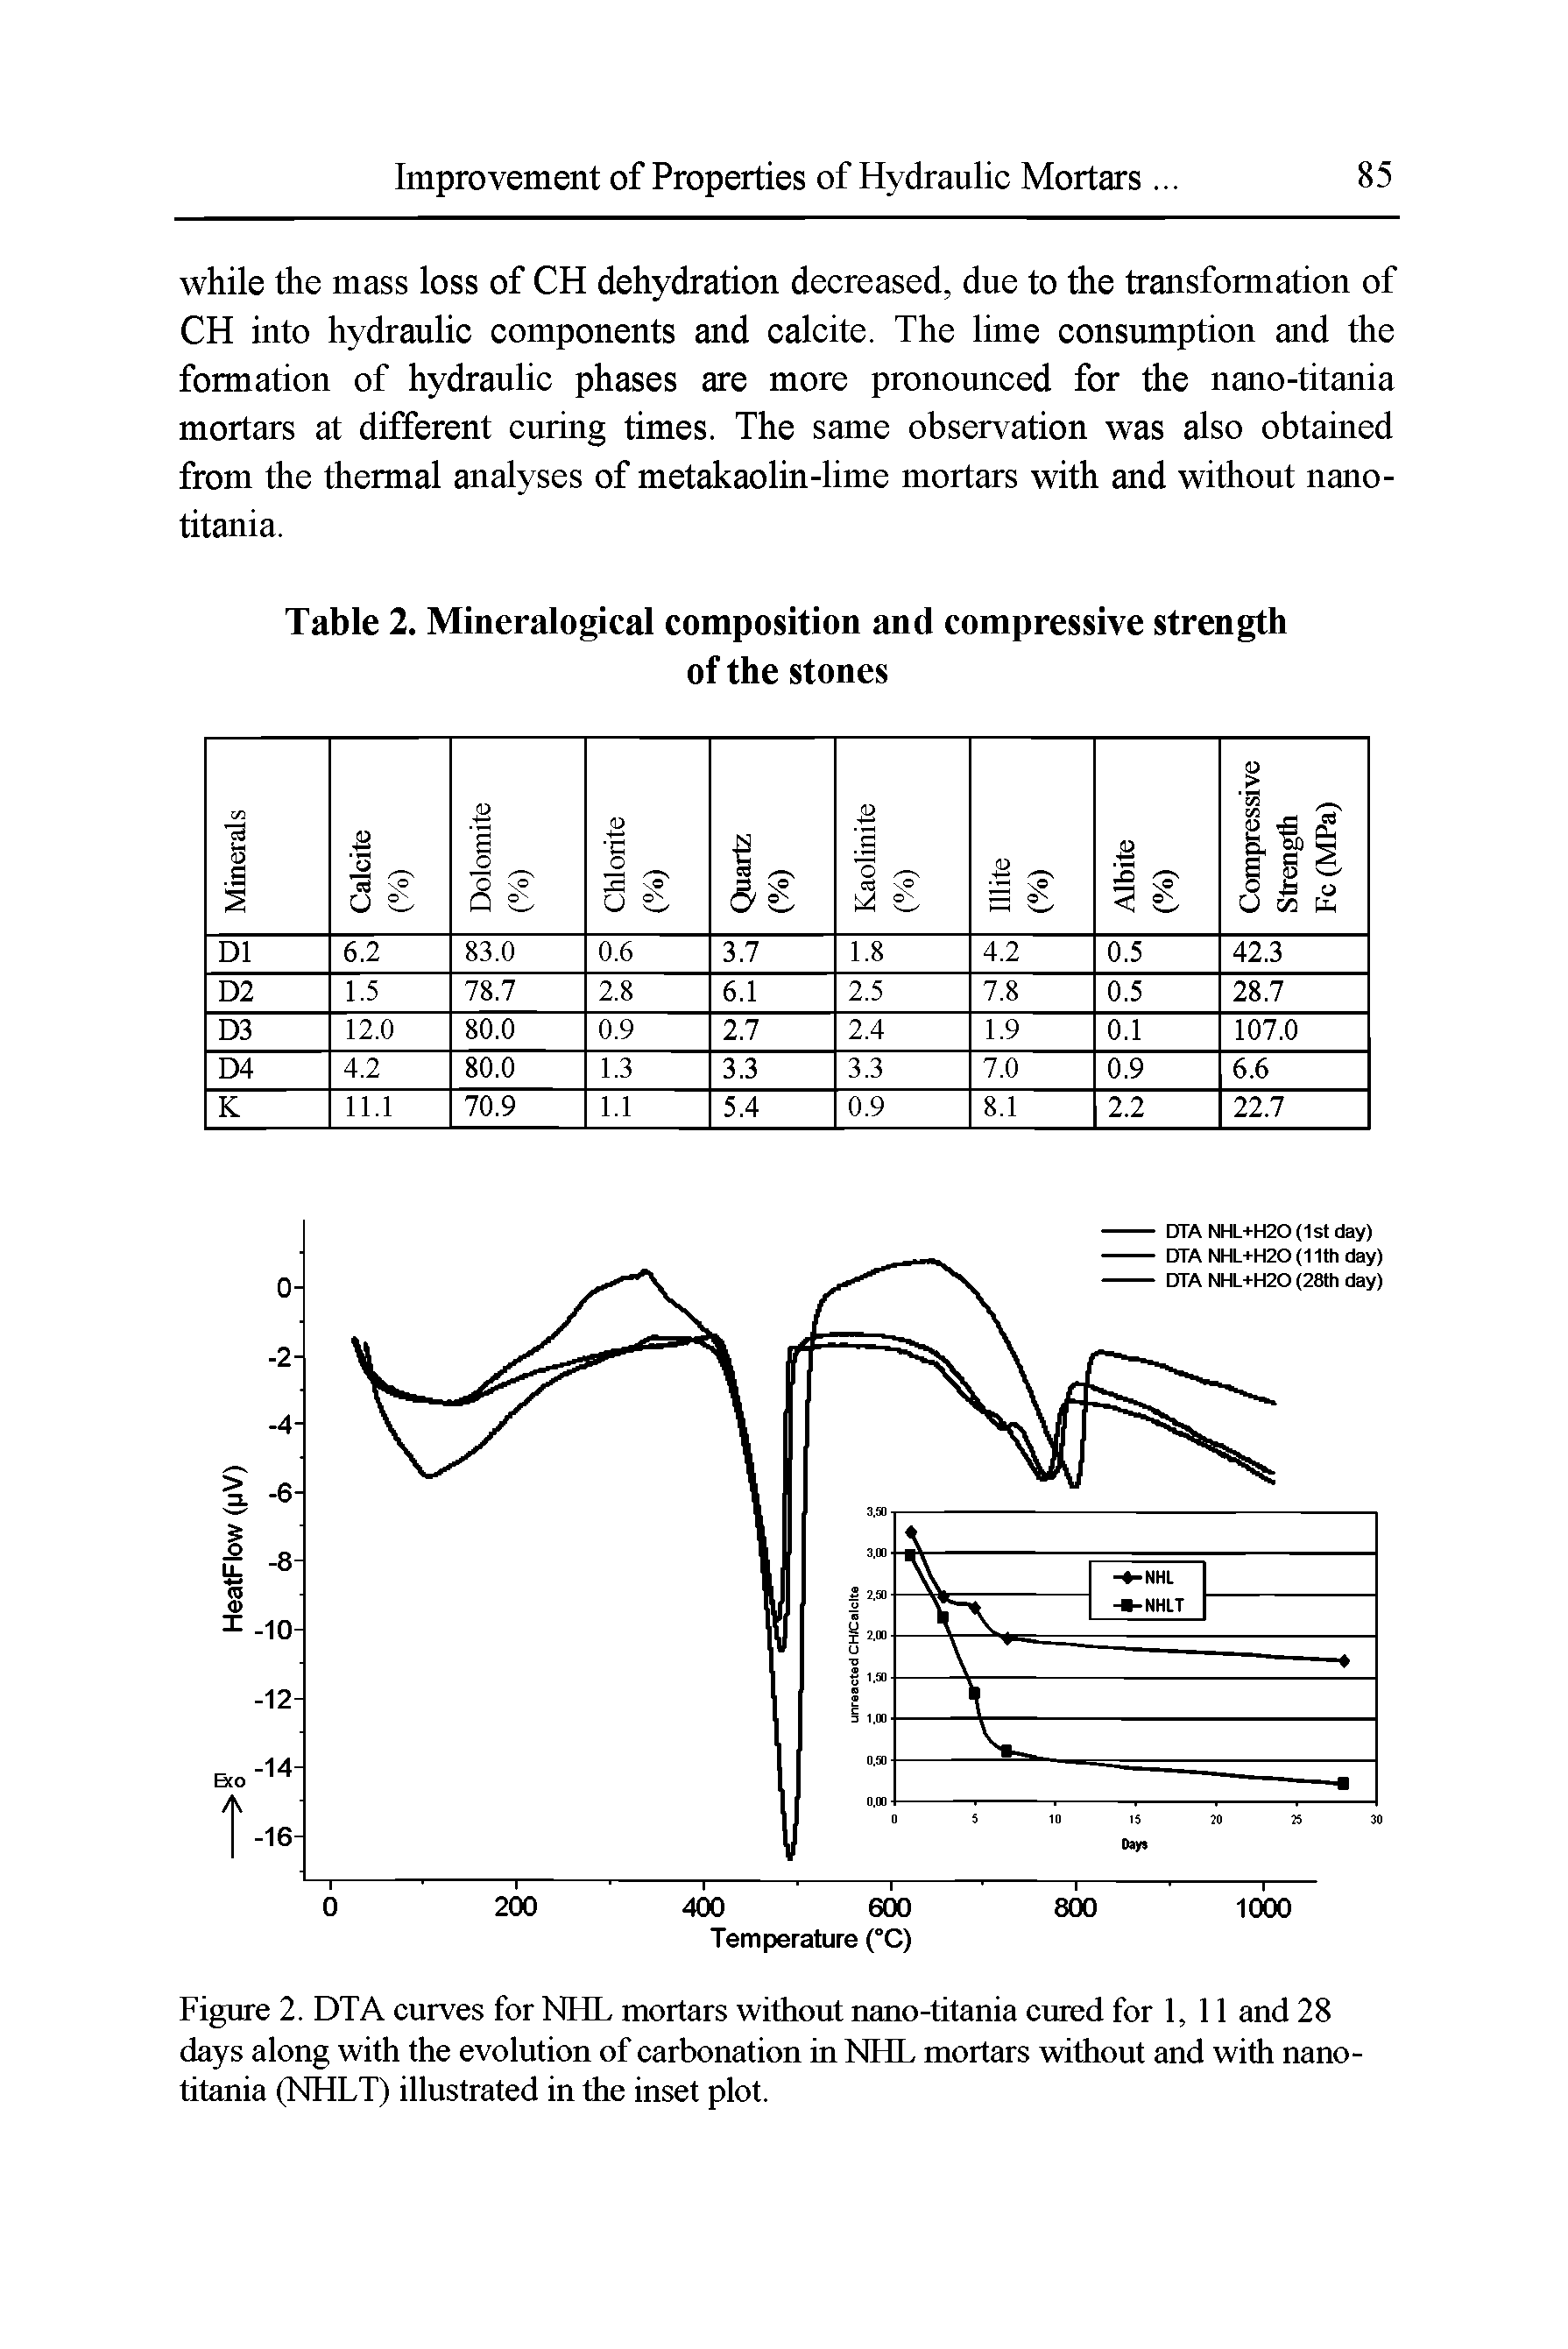 Figure 2. DTA curves for NHL mortars without nano-titania cured for 1, 11 and 28 days along with the evolution of carbonation in NHL mortars without and with nano-titania (NHLT) illustrated in the inset plot.